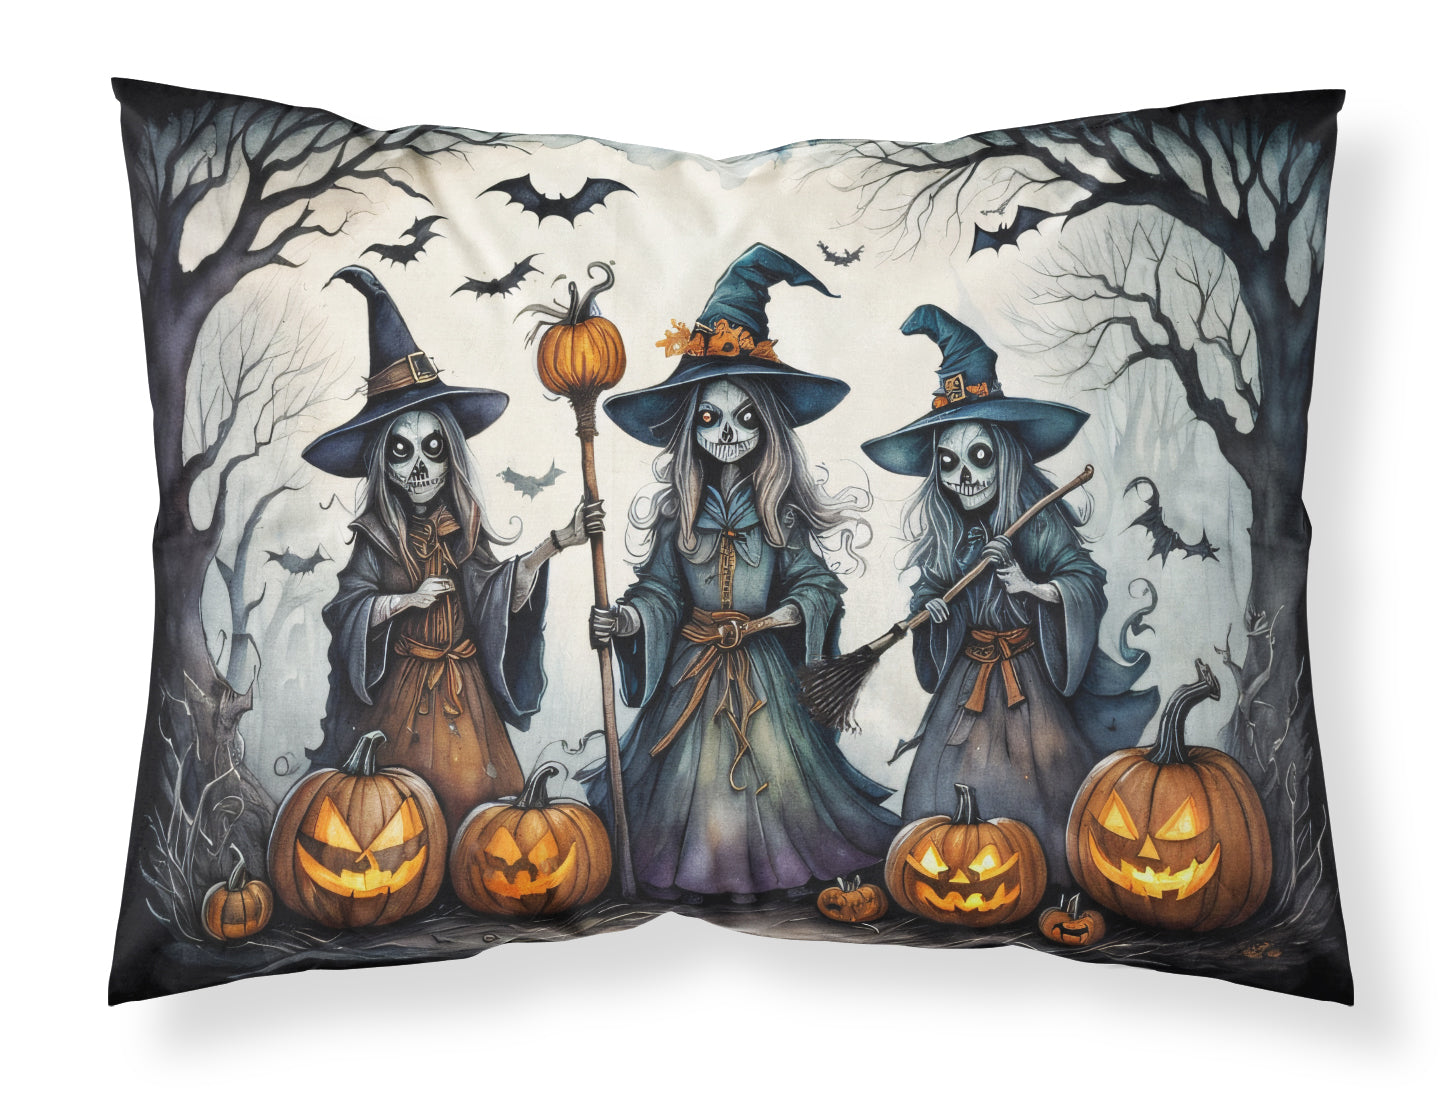 Buy this Witches Spooky Halloween Fabric Standard Pillowcase